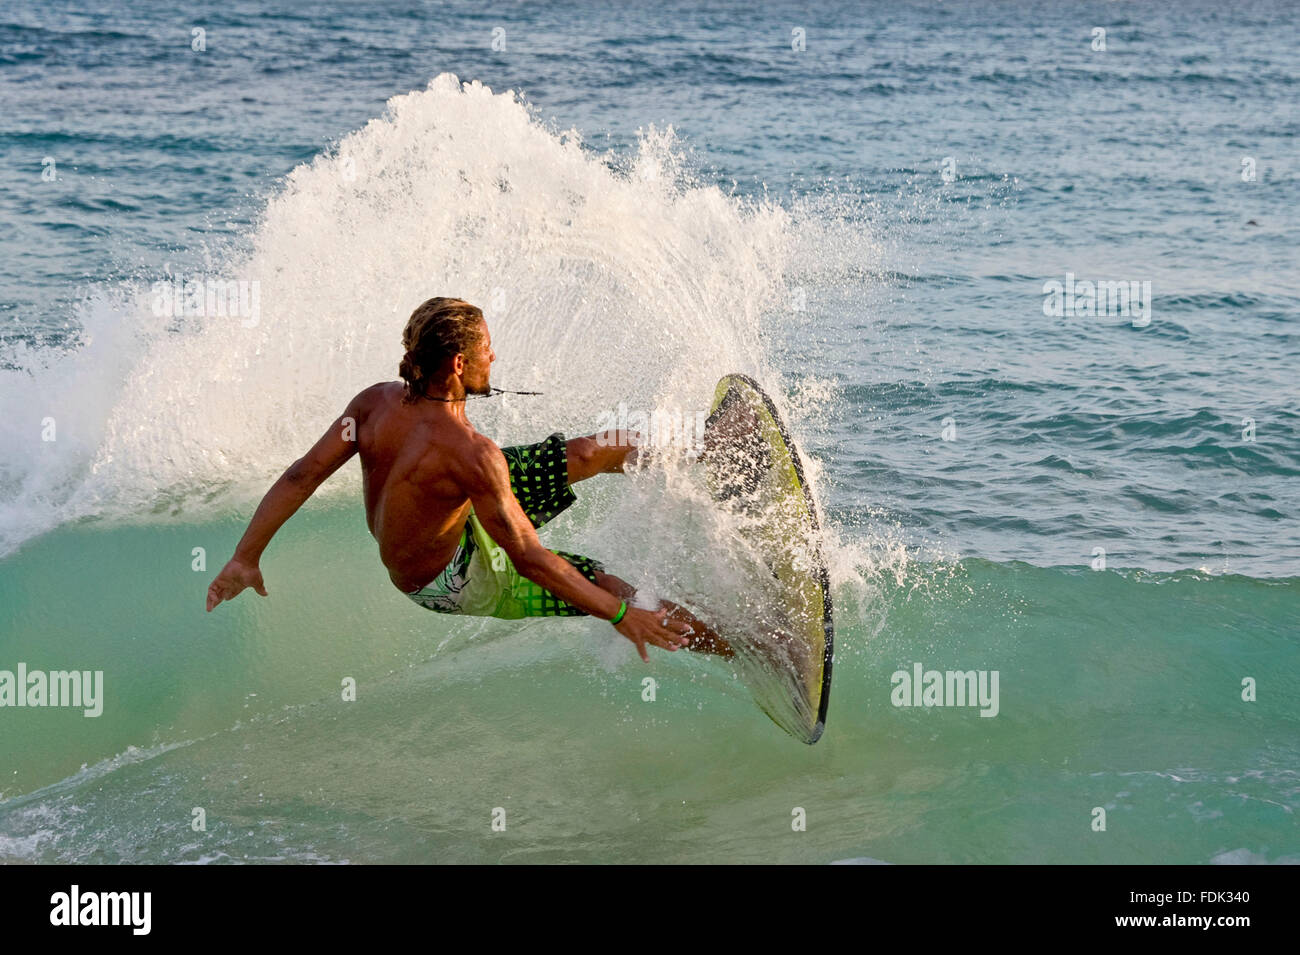 A skimboarder performs a trick on the beach at Santa Maria, Island of Sal, Cape Verde Islands. Stock Photo